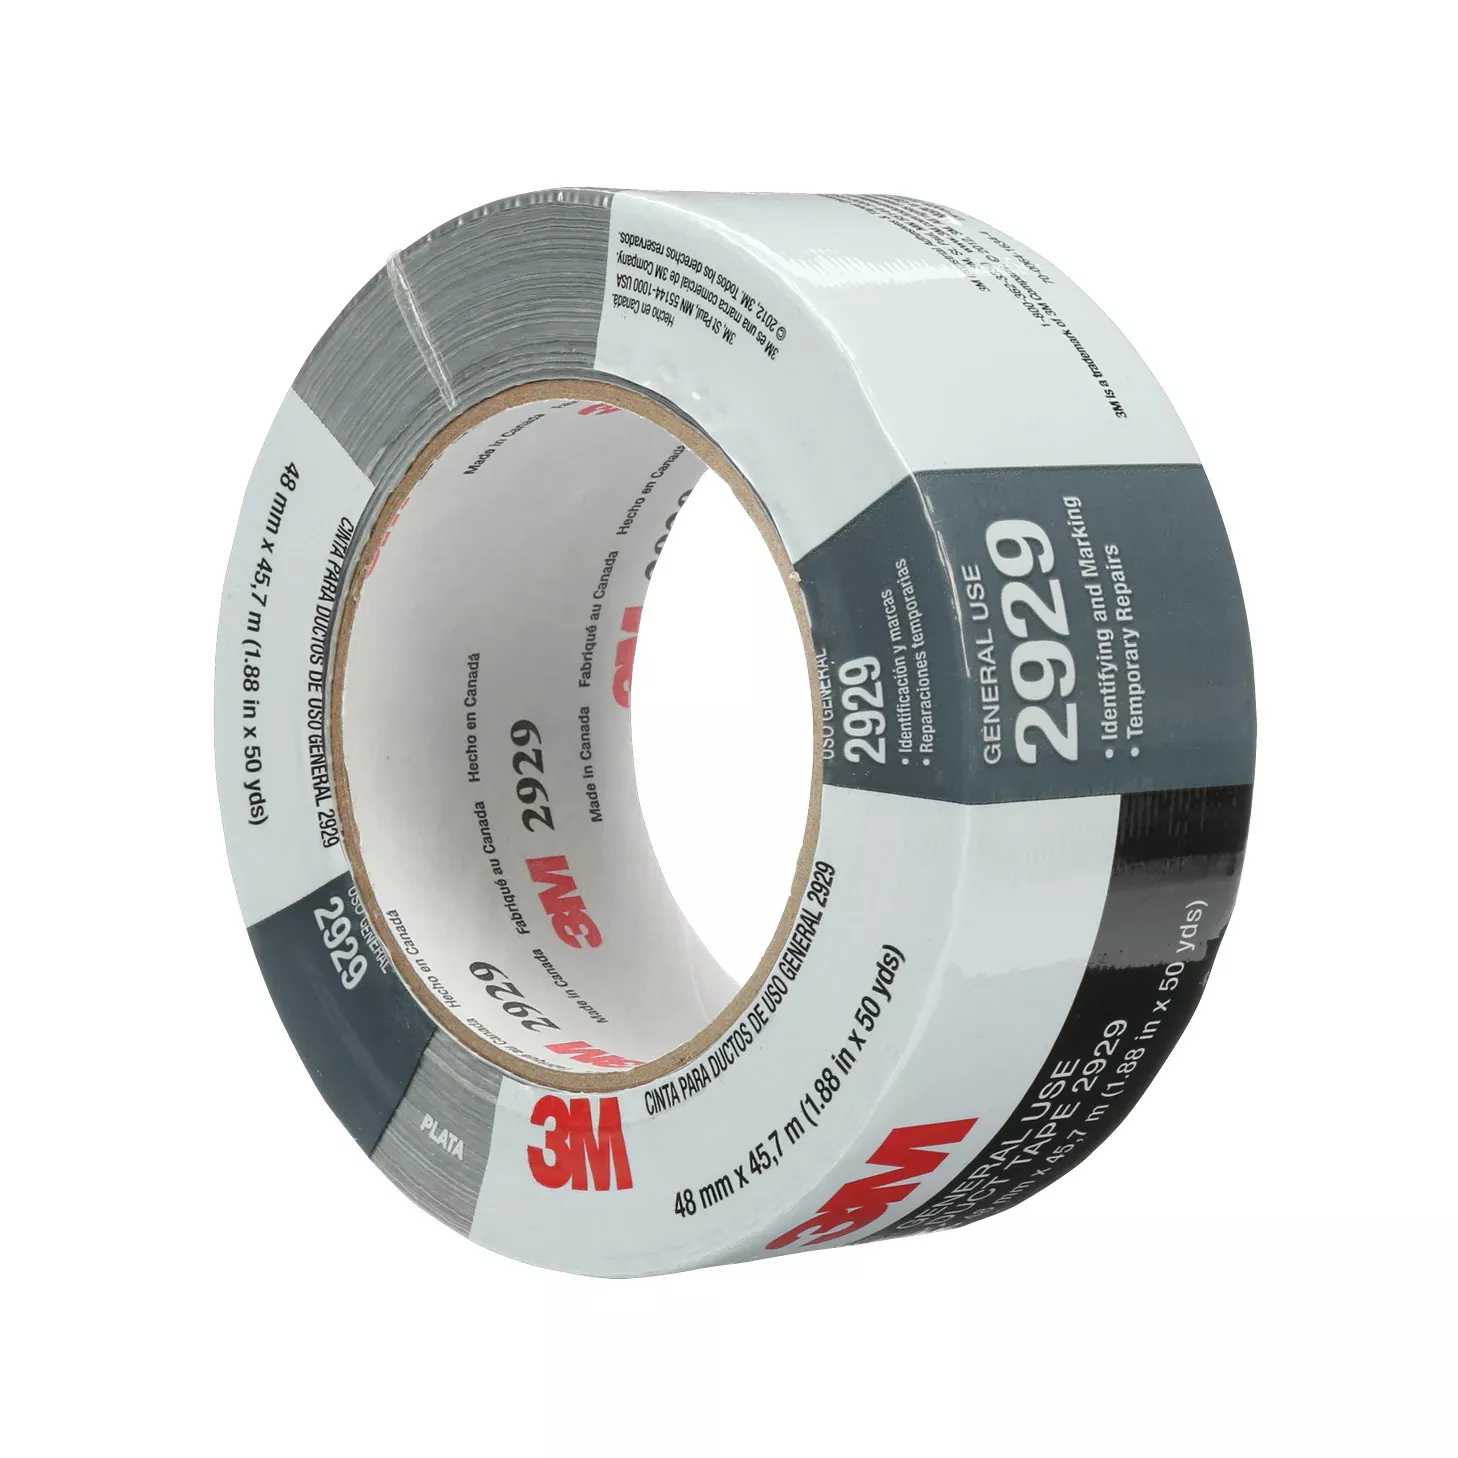 3M™ General Use Duct Tape 2929, Silver, 1.88 in x 50 yd, 5.5 mil, 24
Roll/Case, Individually Wrapped Conveniently Packaged